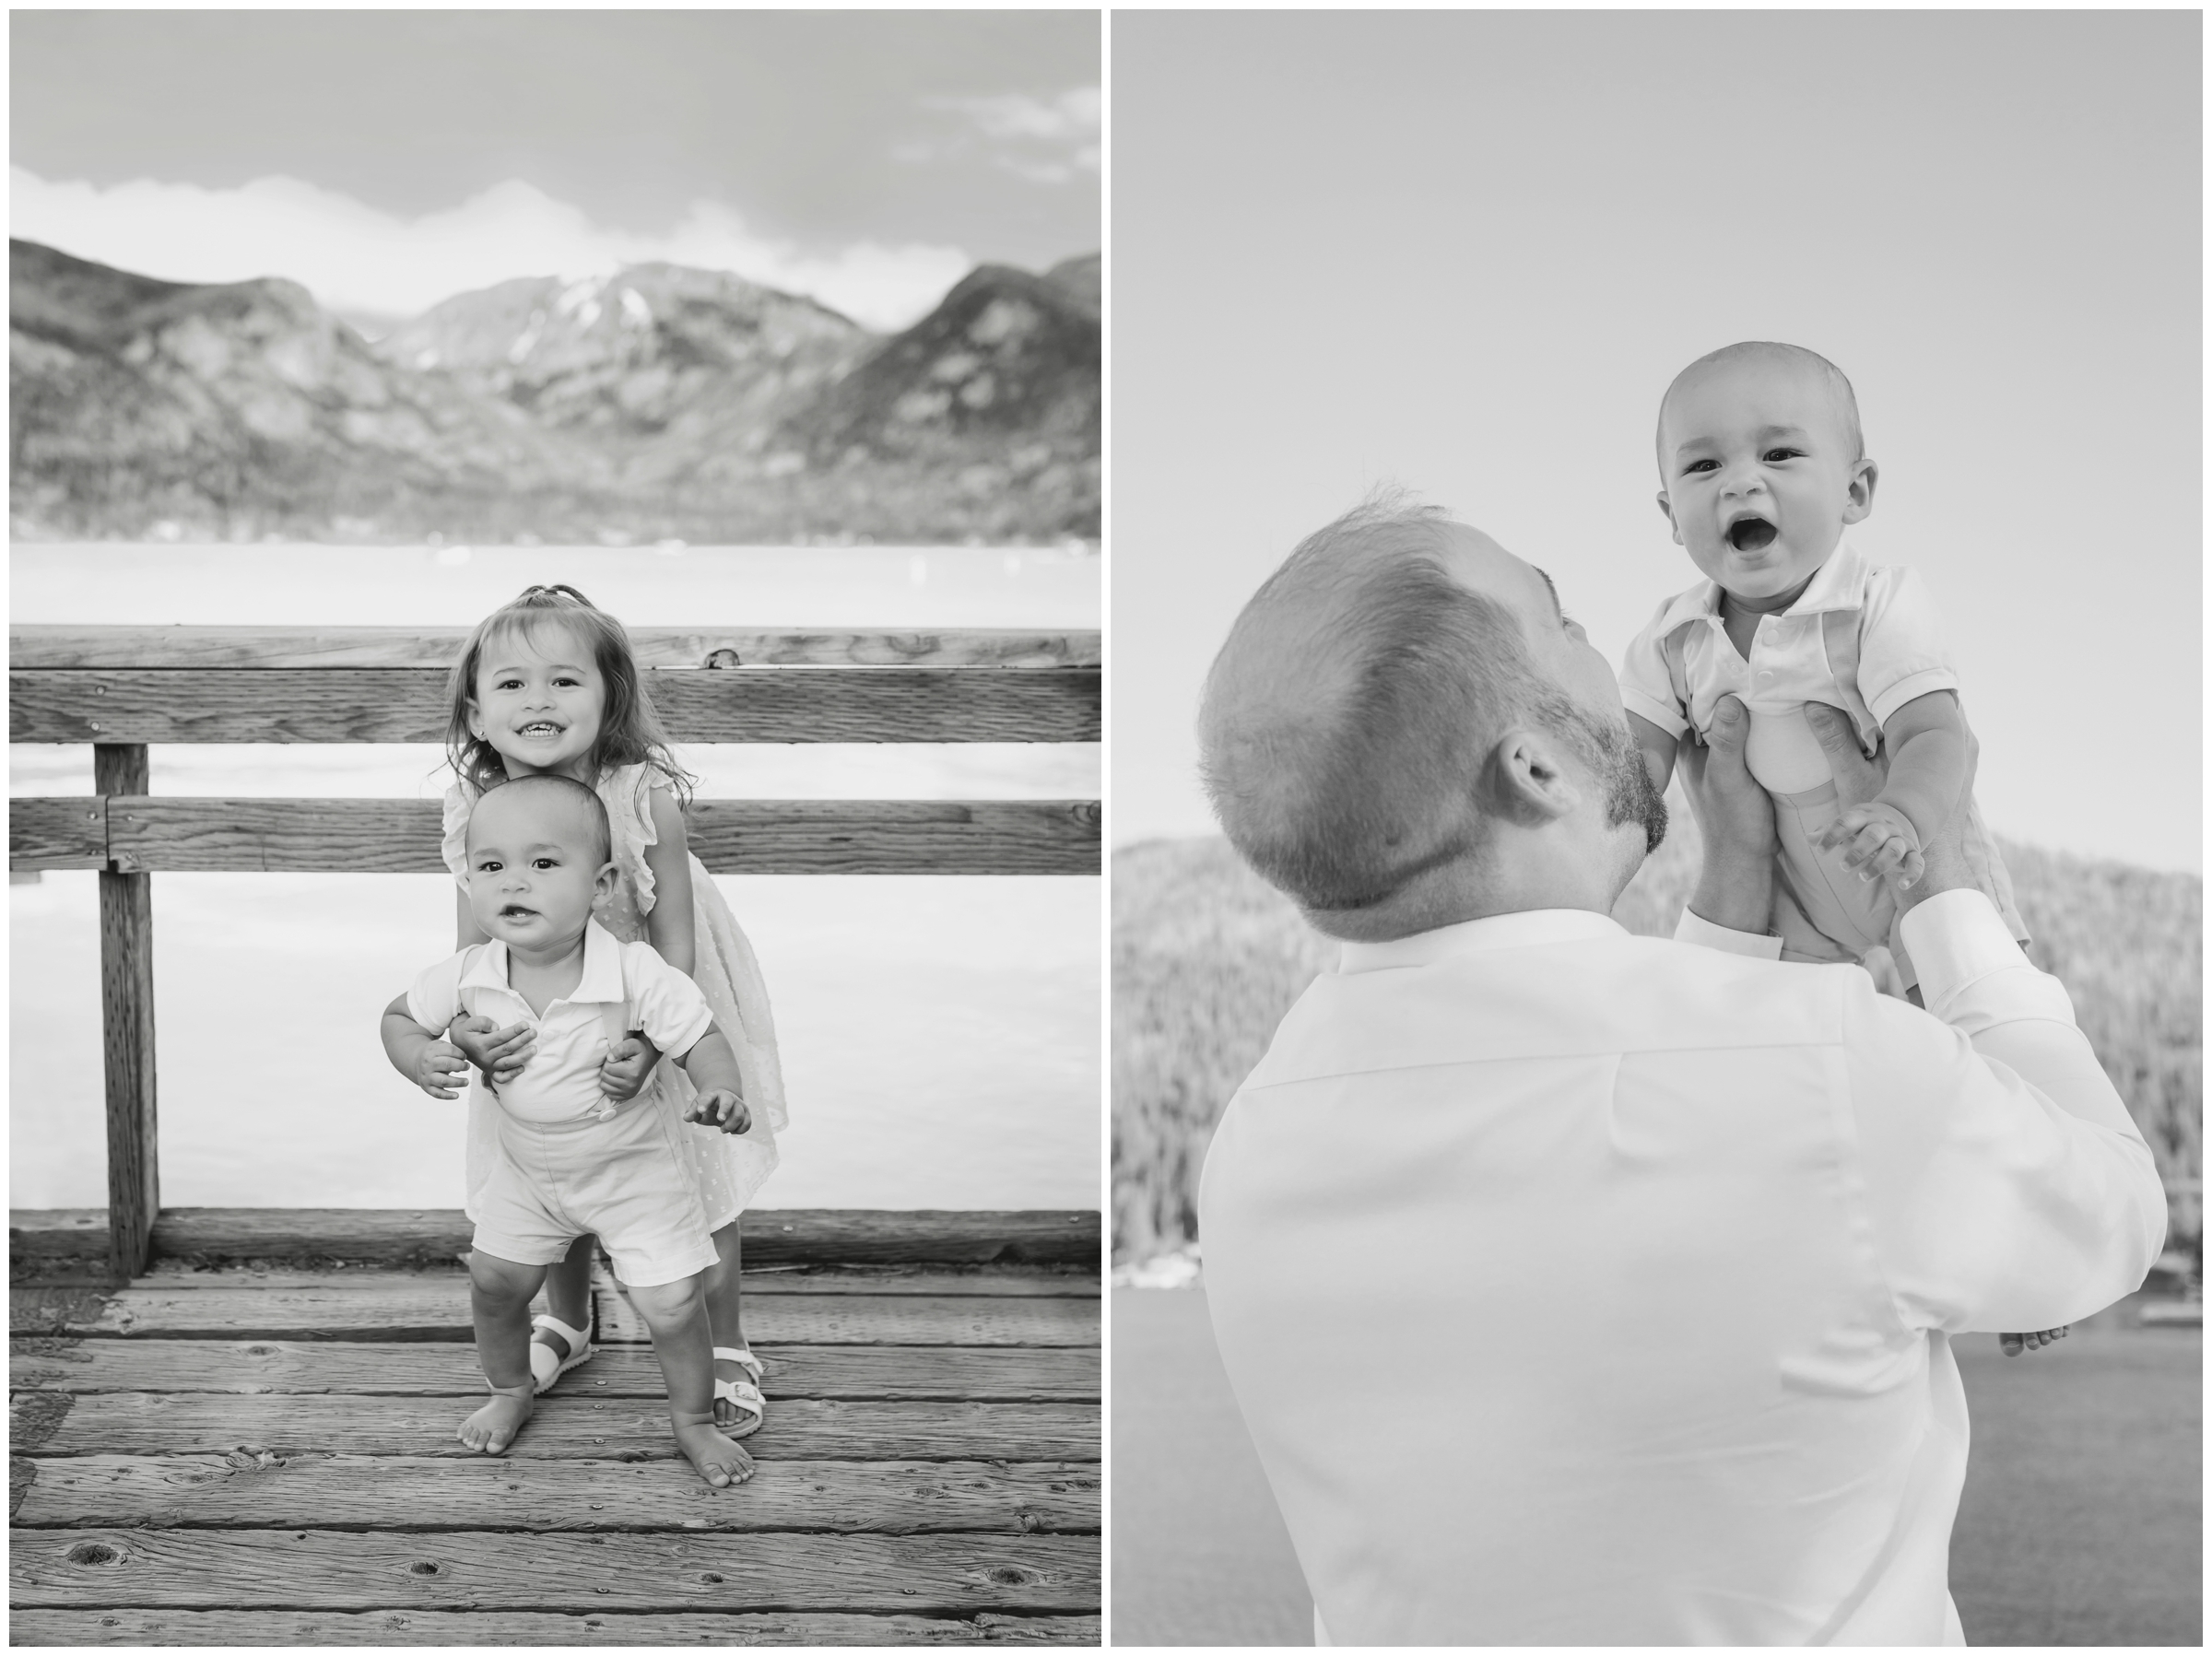 candid family photography inspiration in the Colorado mountains by Plum Pretty Photography 